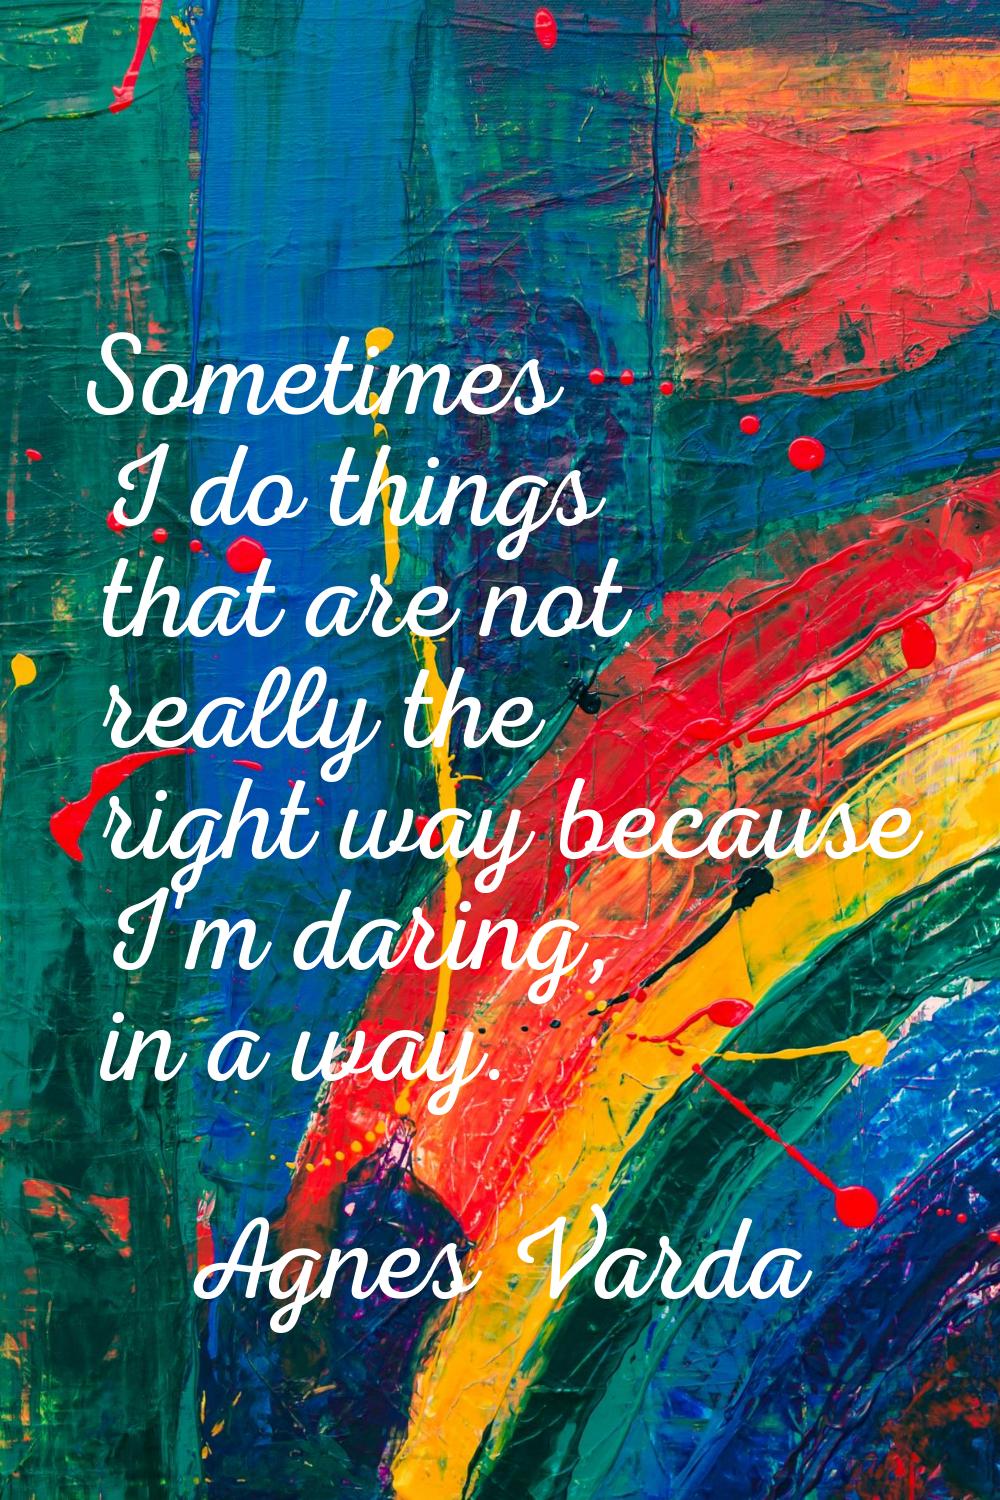 Sometimes I do things that are not really the right way because I'm daring, in a way.